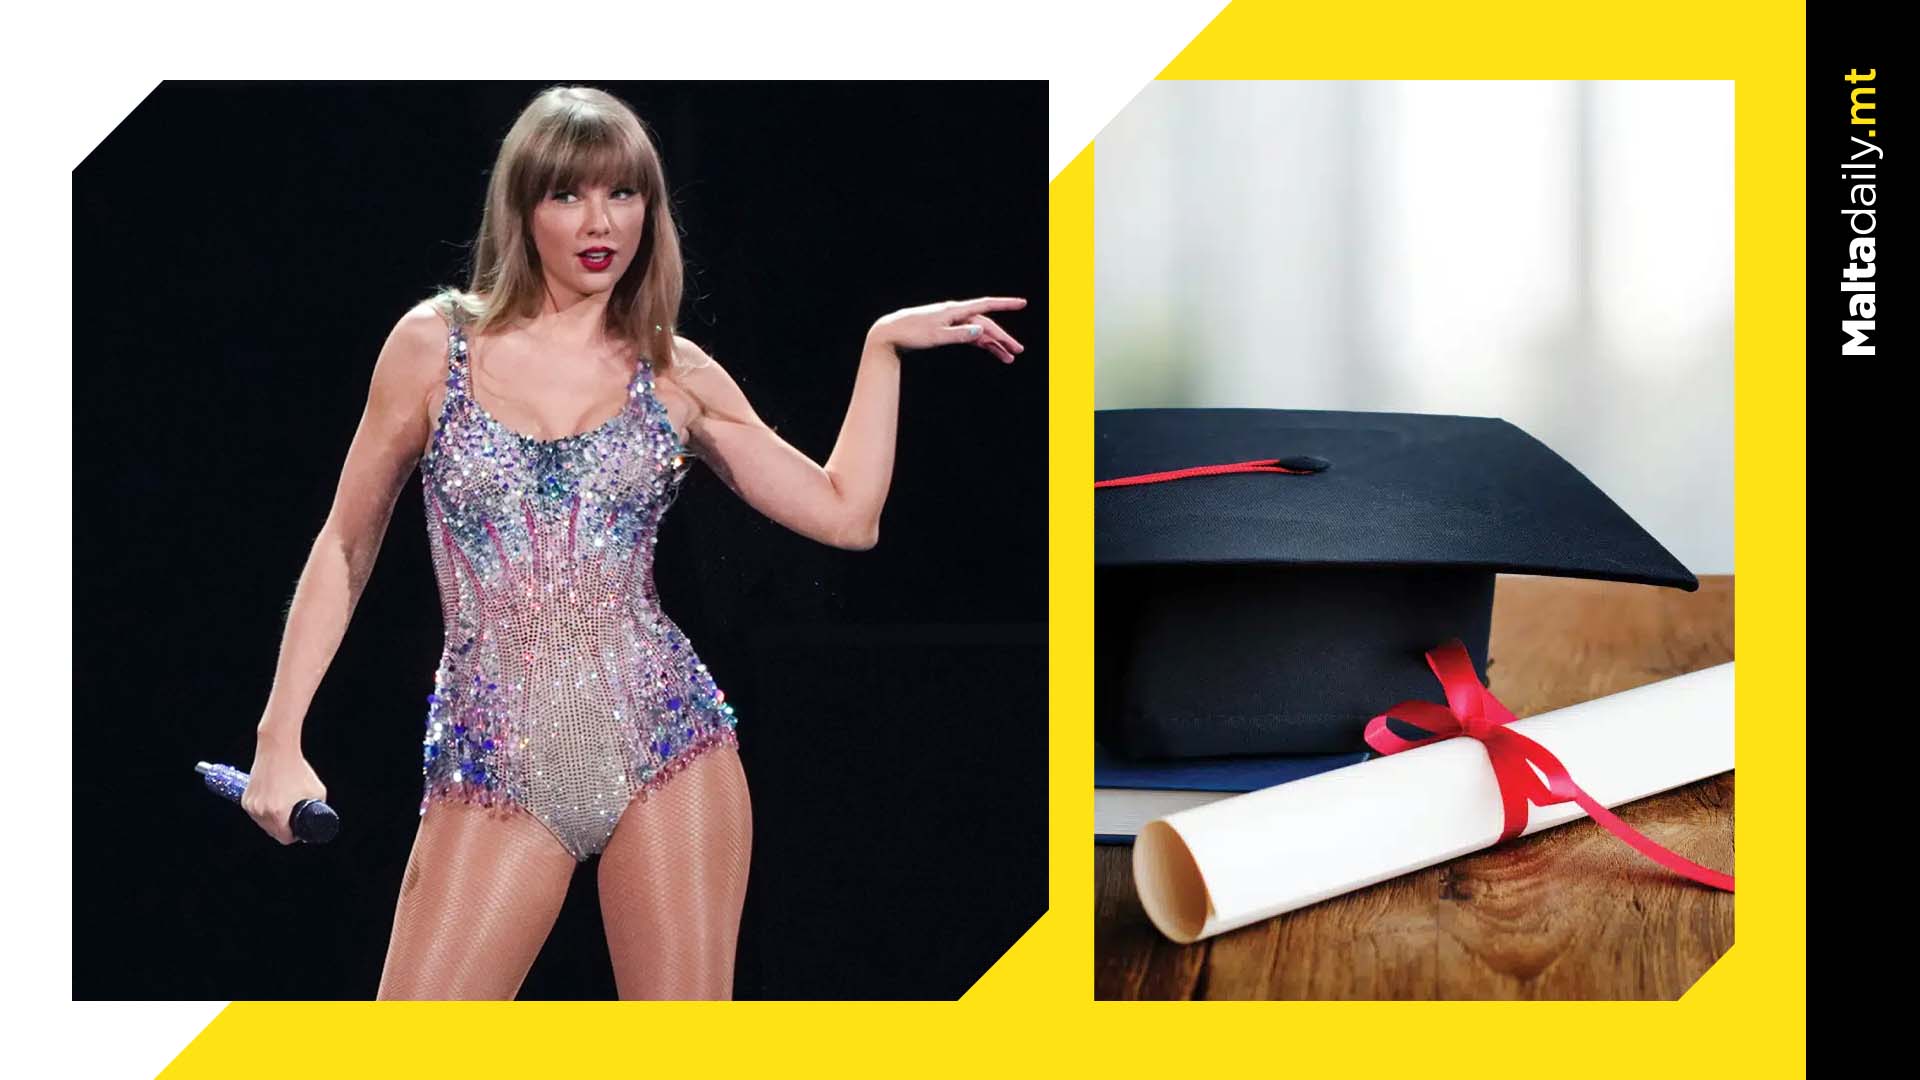 You Can Now Take A University Course On Taylor Swift